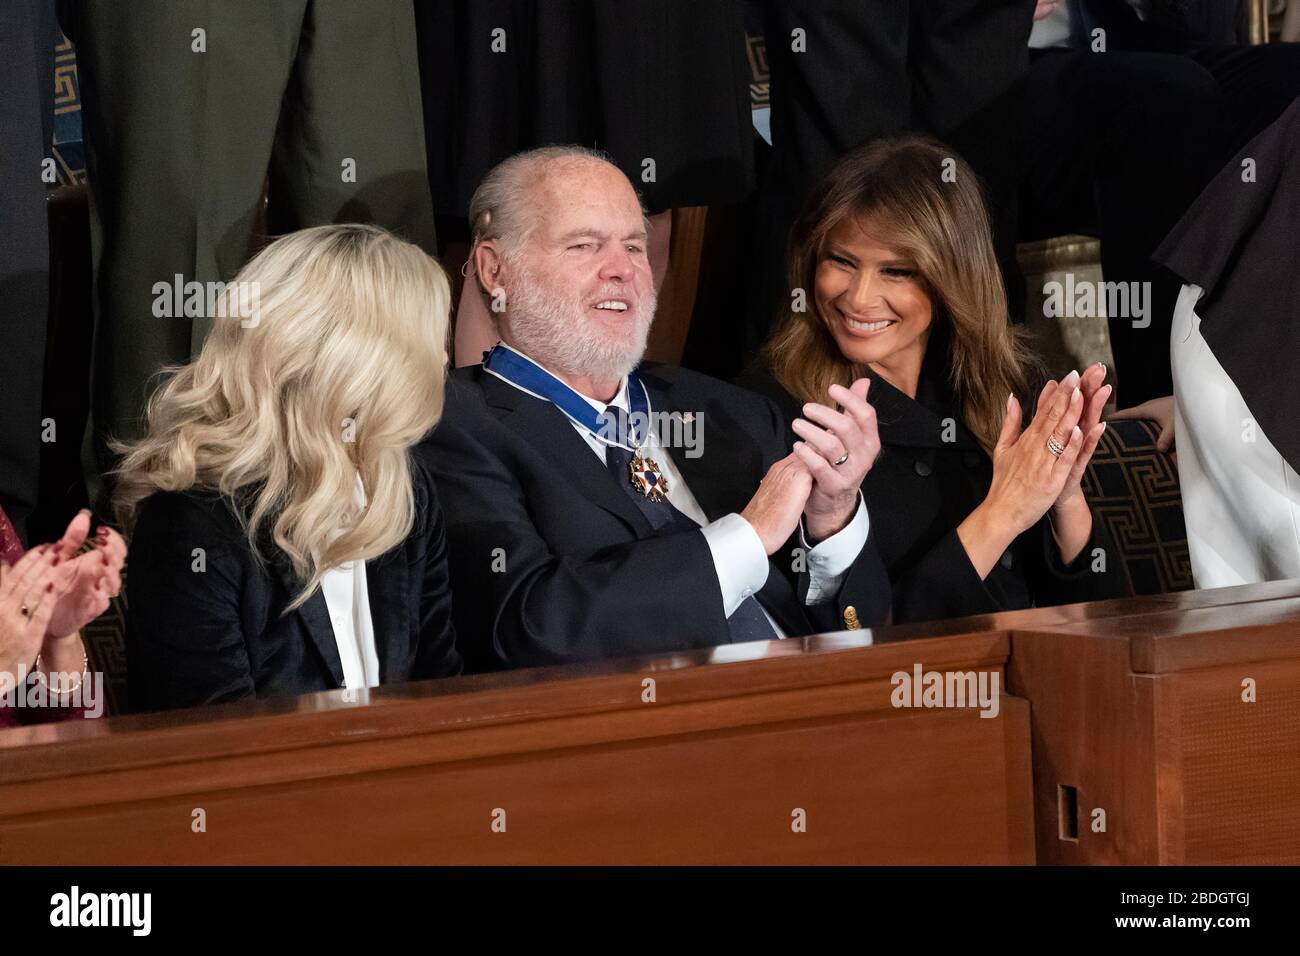 First Lady Melania Trump applauds gallery guest Rush Limbaugh after presenting him with the Presidential Medal of Freedom during President Donald J. Trump’s State of the Union address Tuesday, Feb. 4, 2020, in the House chamber at the U.S. Capitol in Washington, D.C. Stock Photo